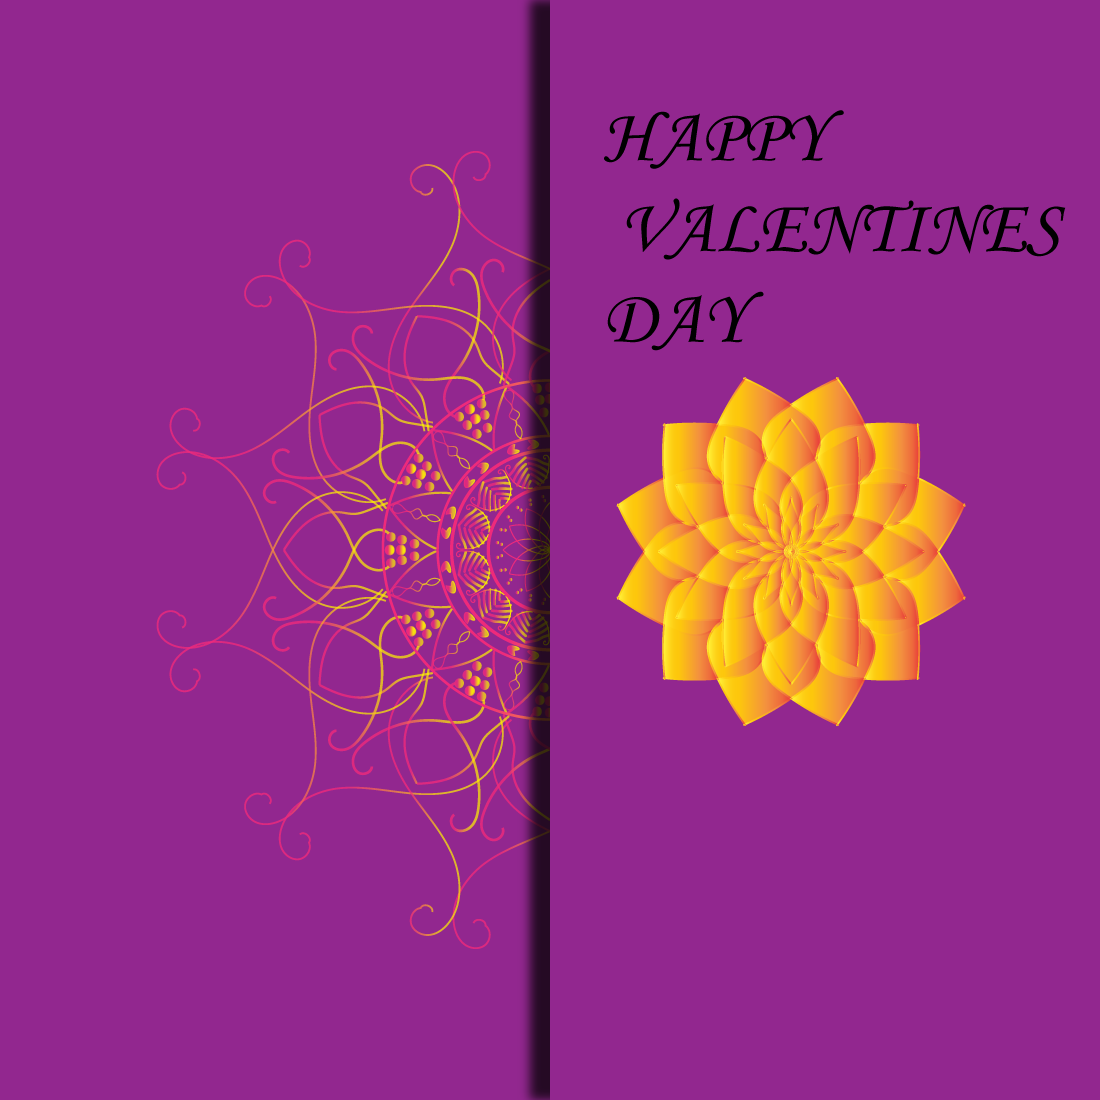 HAPPY VALENTINES DAY cover image.